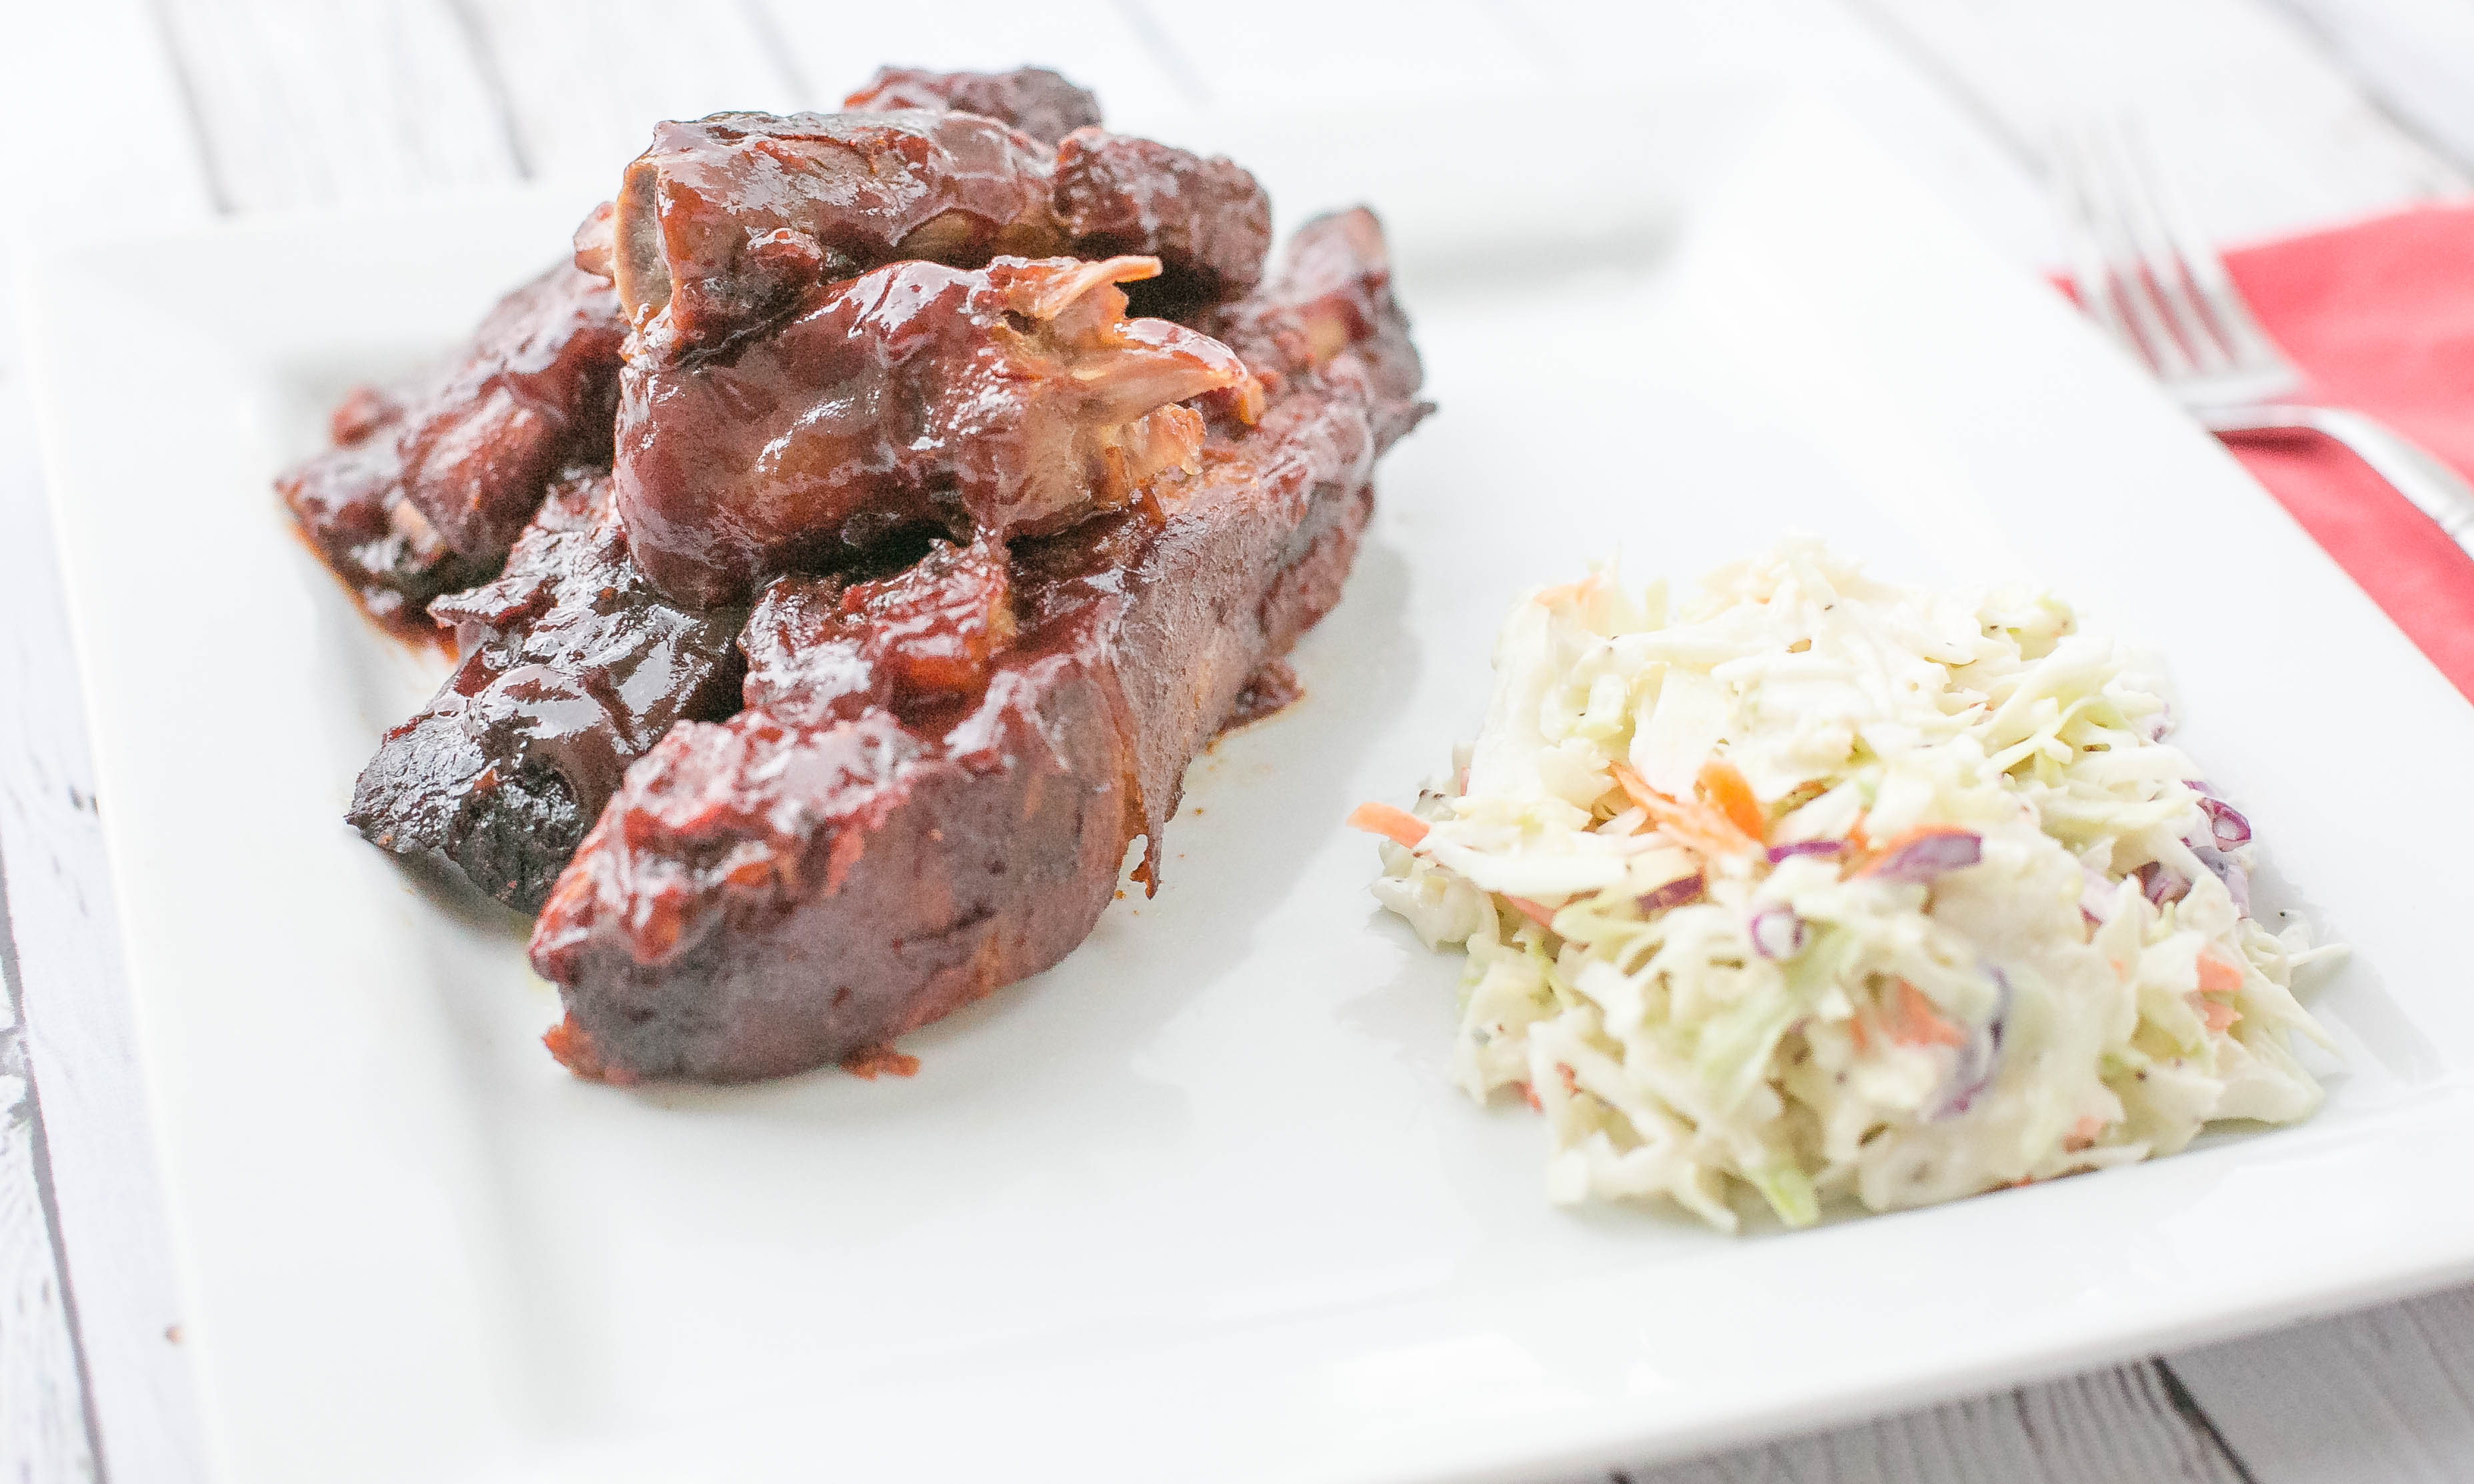 These sweet and spicy BBQ ribs are a delicious dinner. Serve with sides like coleslaw or cornbread for a hearty meal